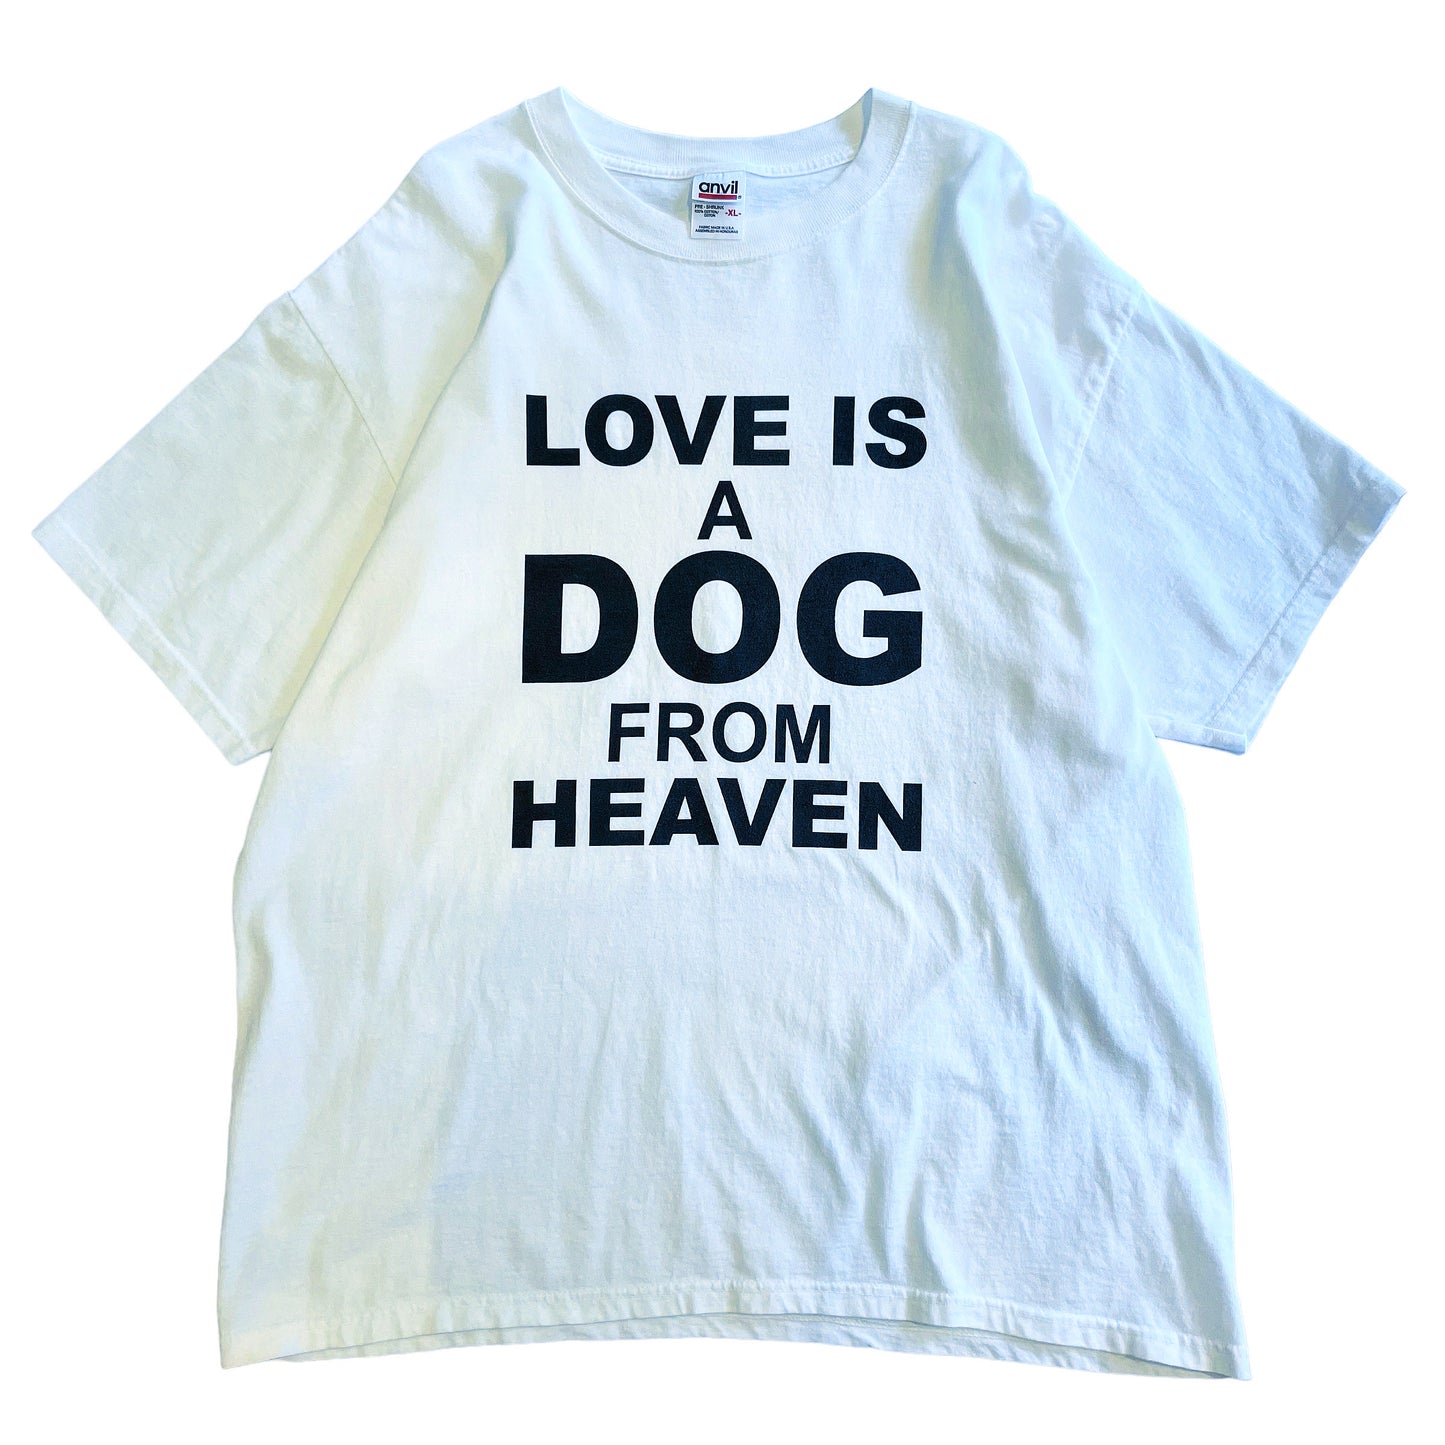 90s〜00s〜 anvil T-shirt LOVE A DOG FROM HEVEN XL アンビル tシャツ ヴィンテージ